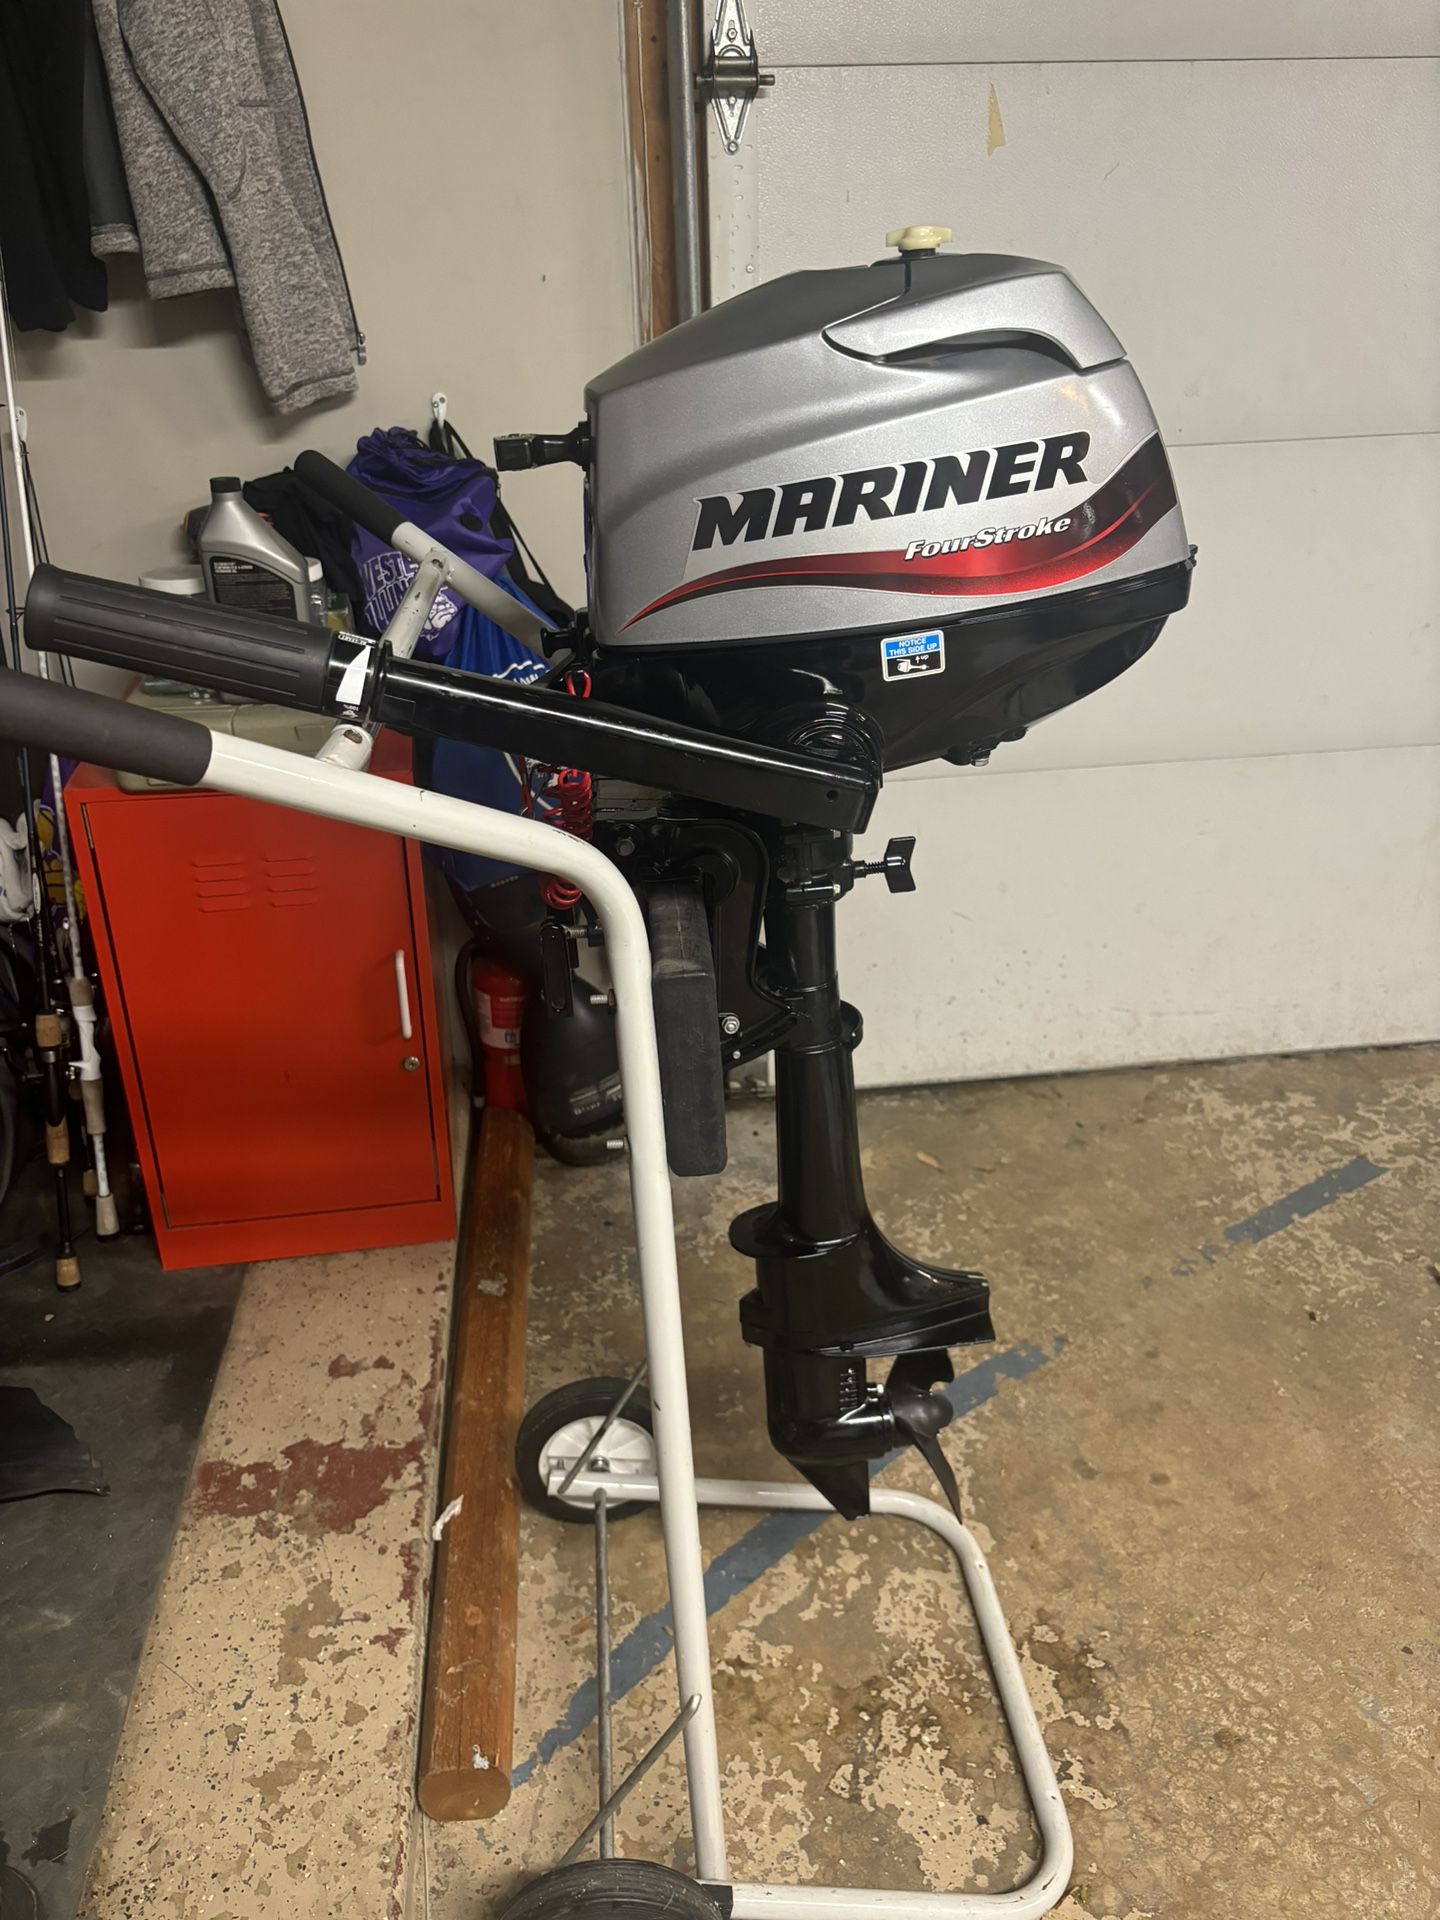 3.5 HP Mariner Outboard